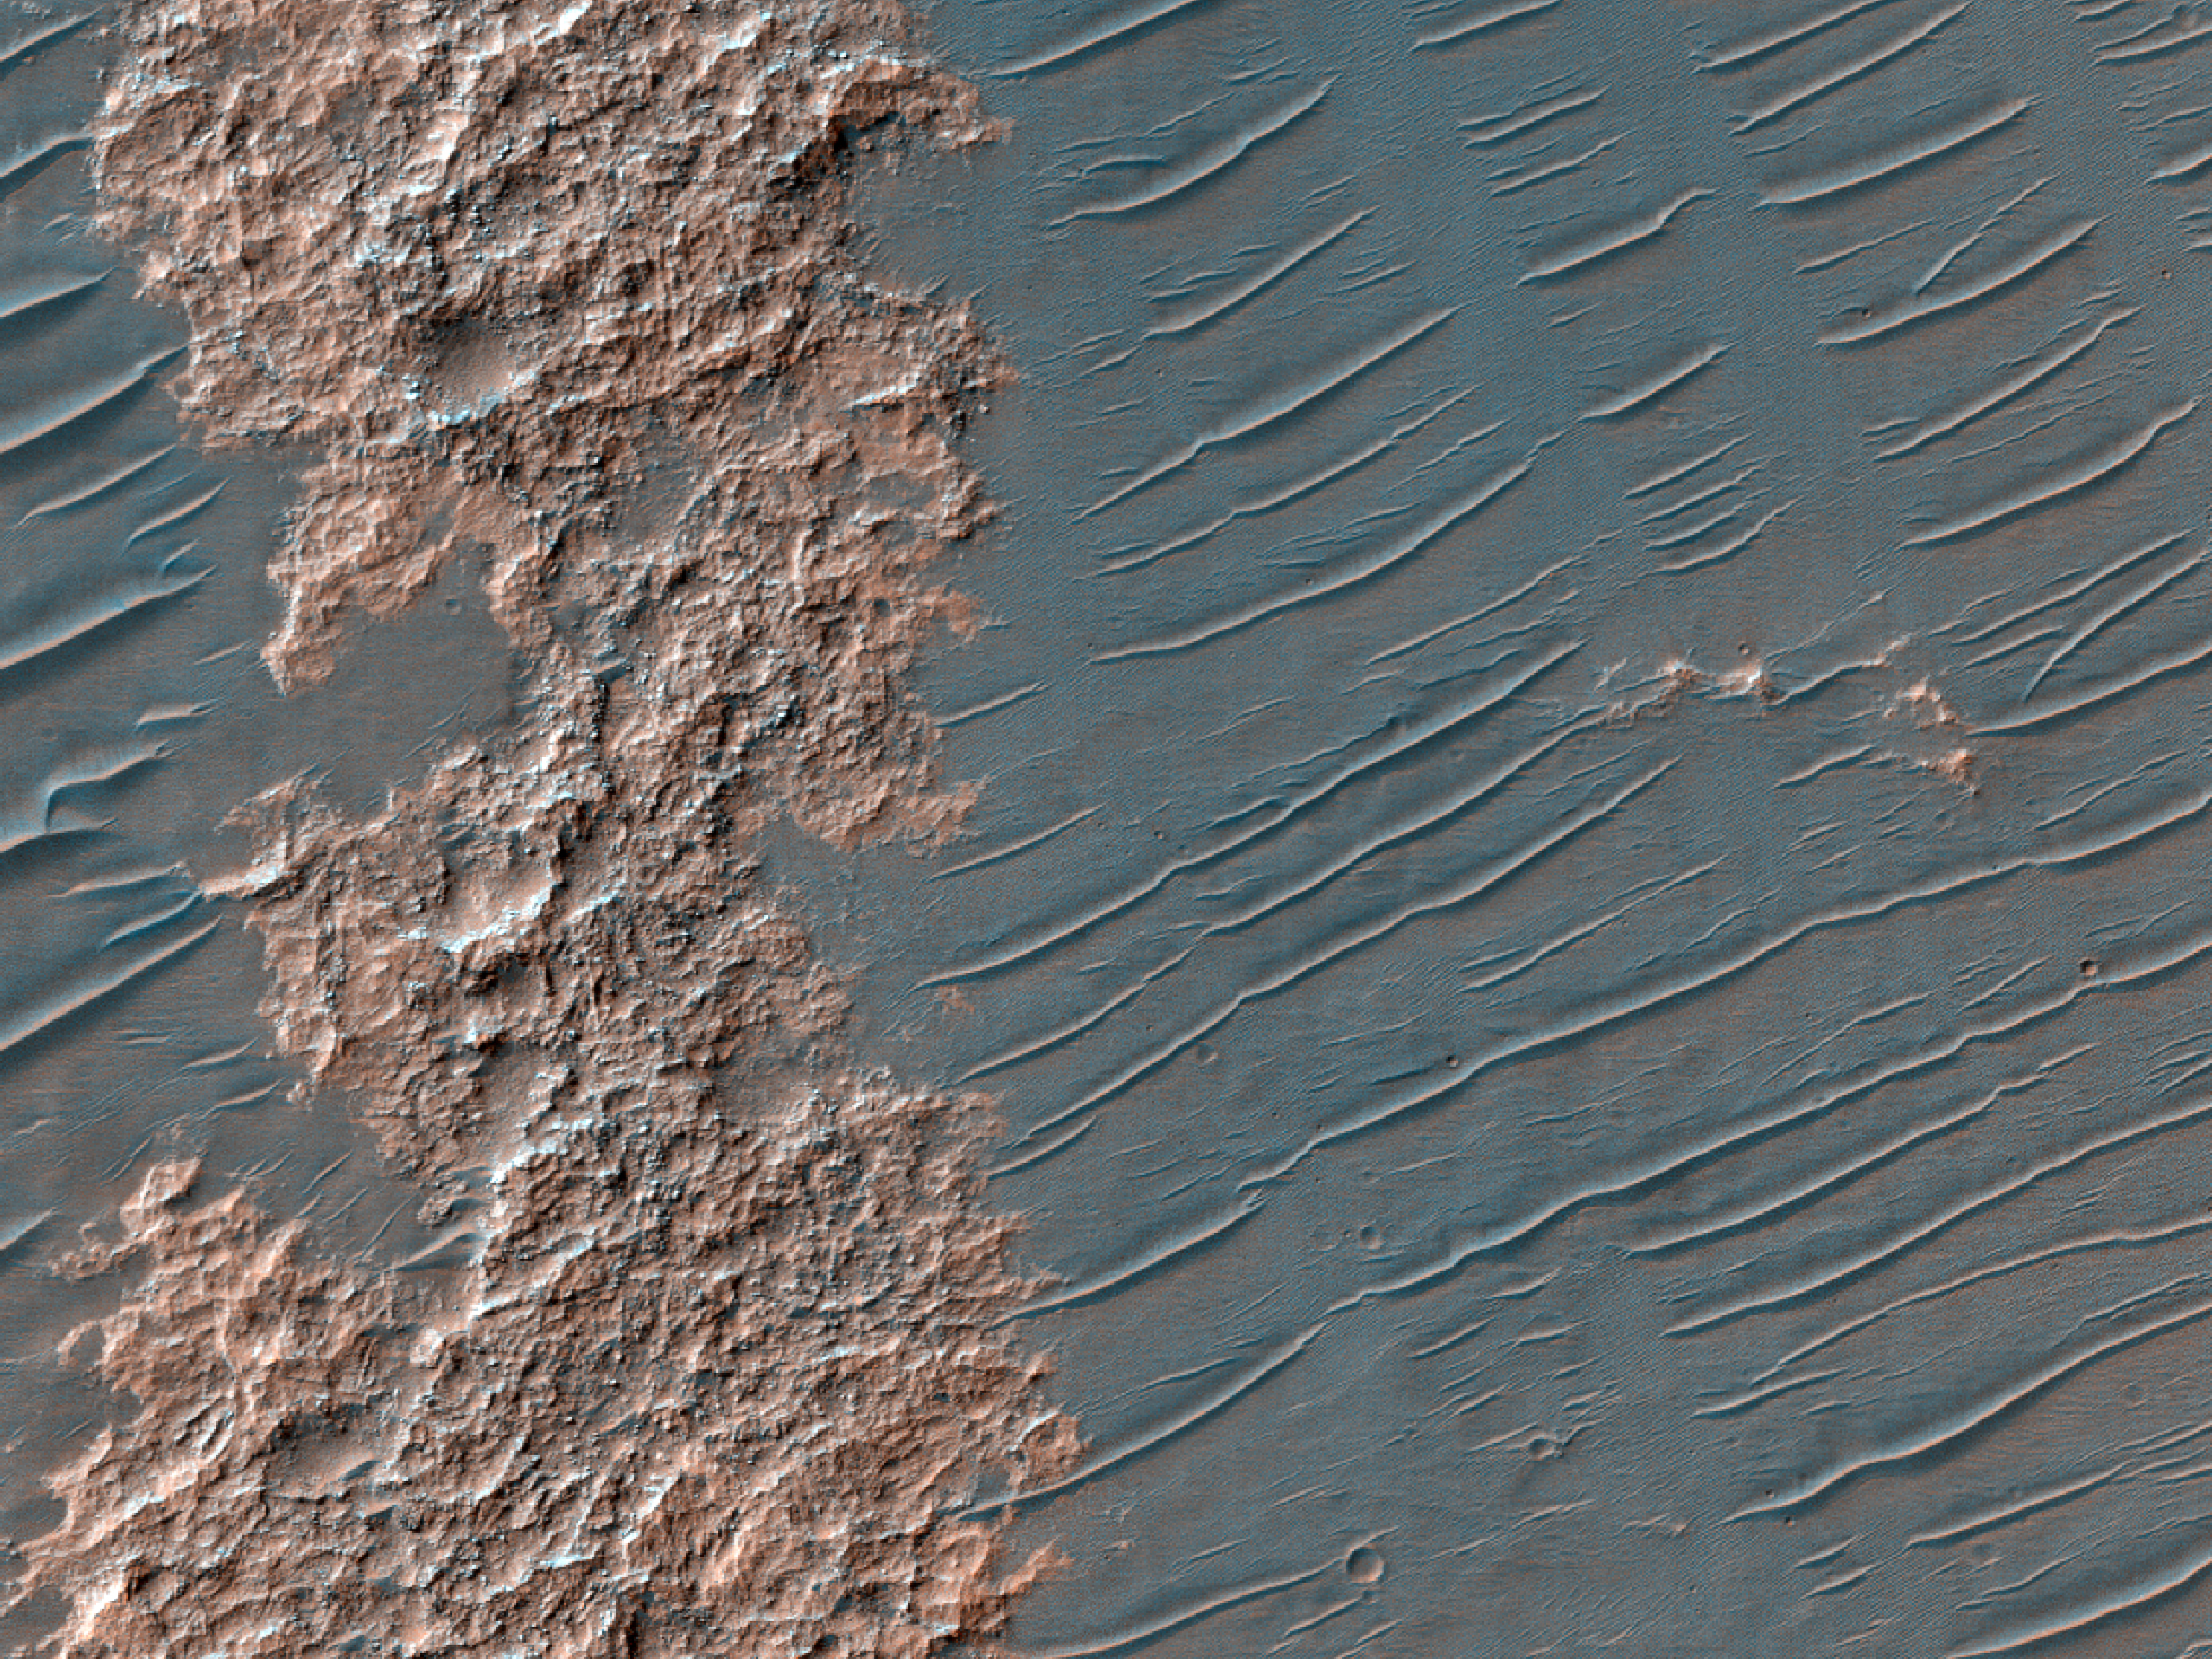 Light-Toned Material on a Crater Floor